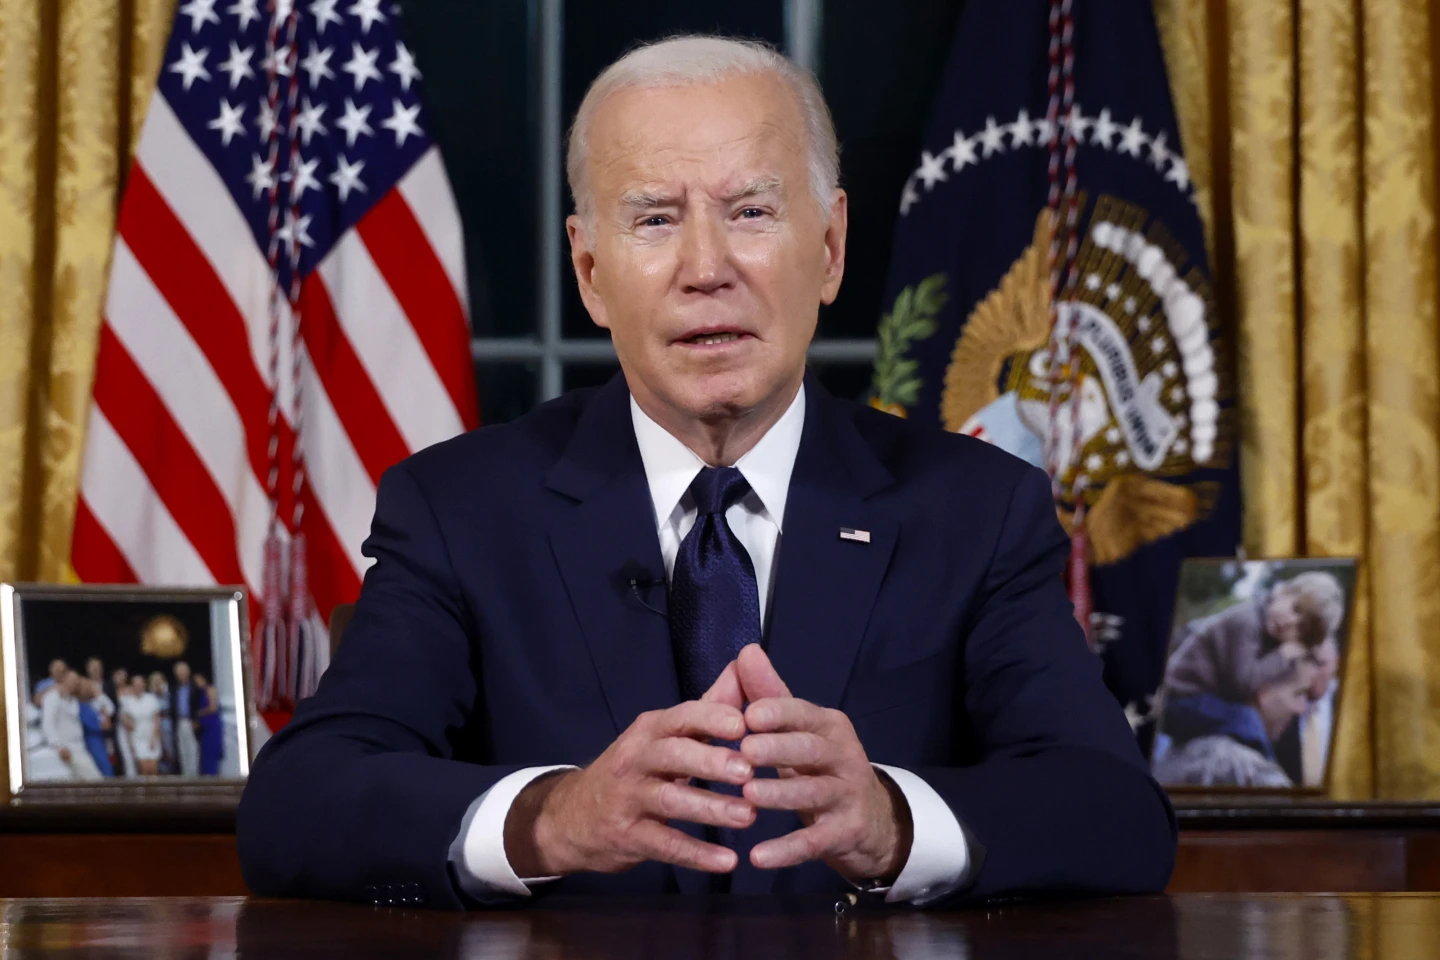 Addressing the nation from the Oval Office, President Joe Biden made his case for major U.S. backing of Ukraine and Israel in a time of war, declaring Thursday night that support is “vital for America’s national security.” (Oct. 19)